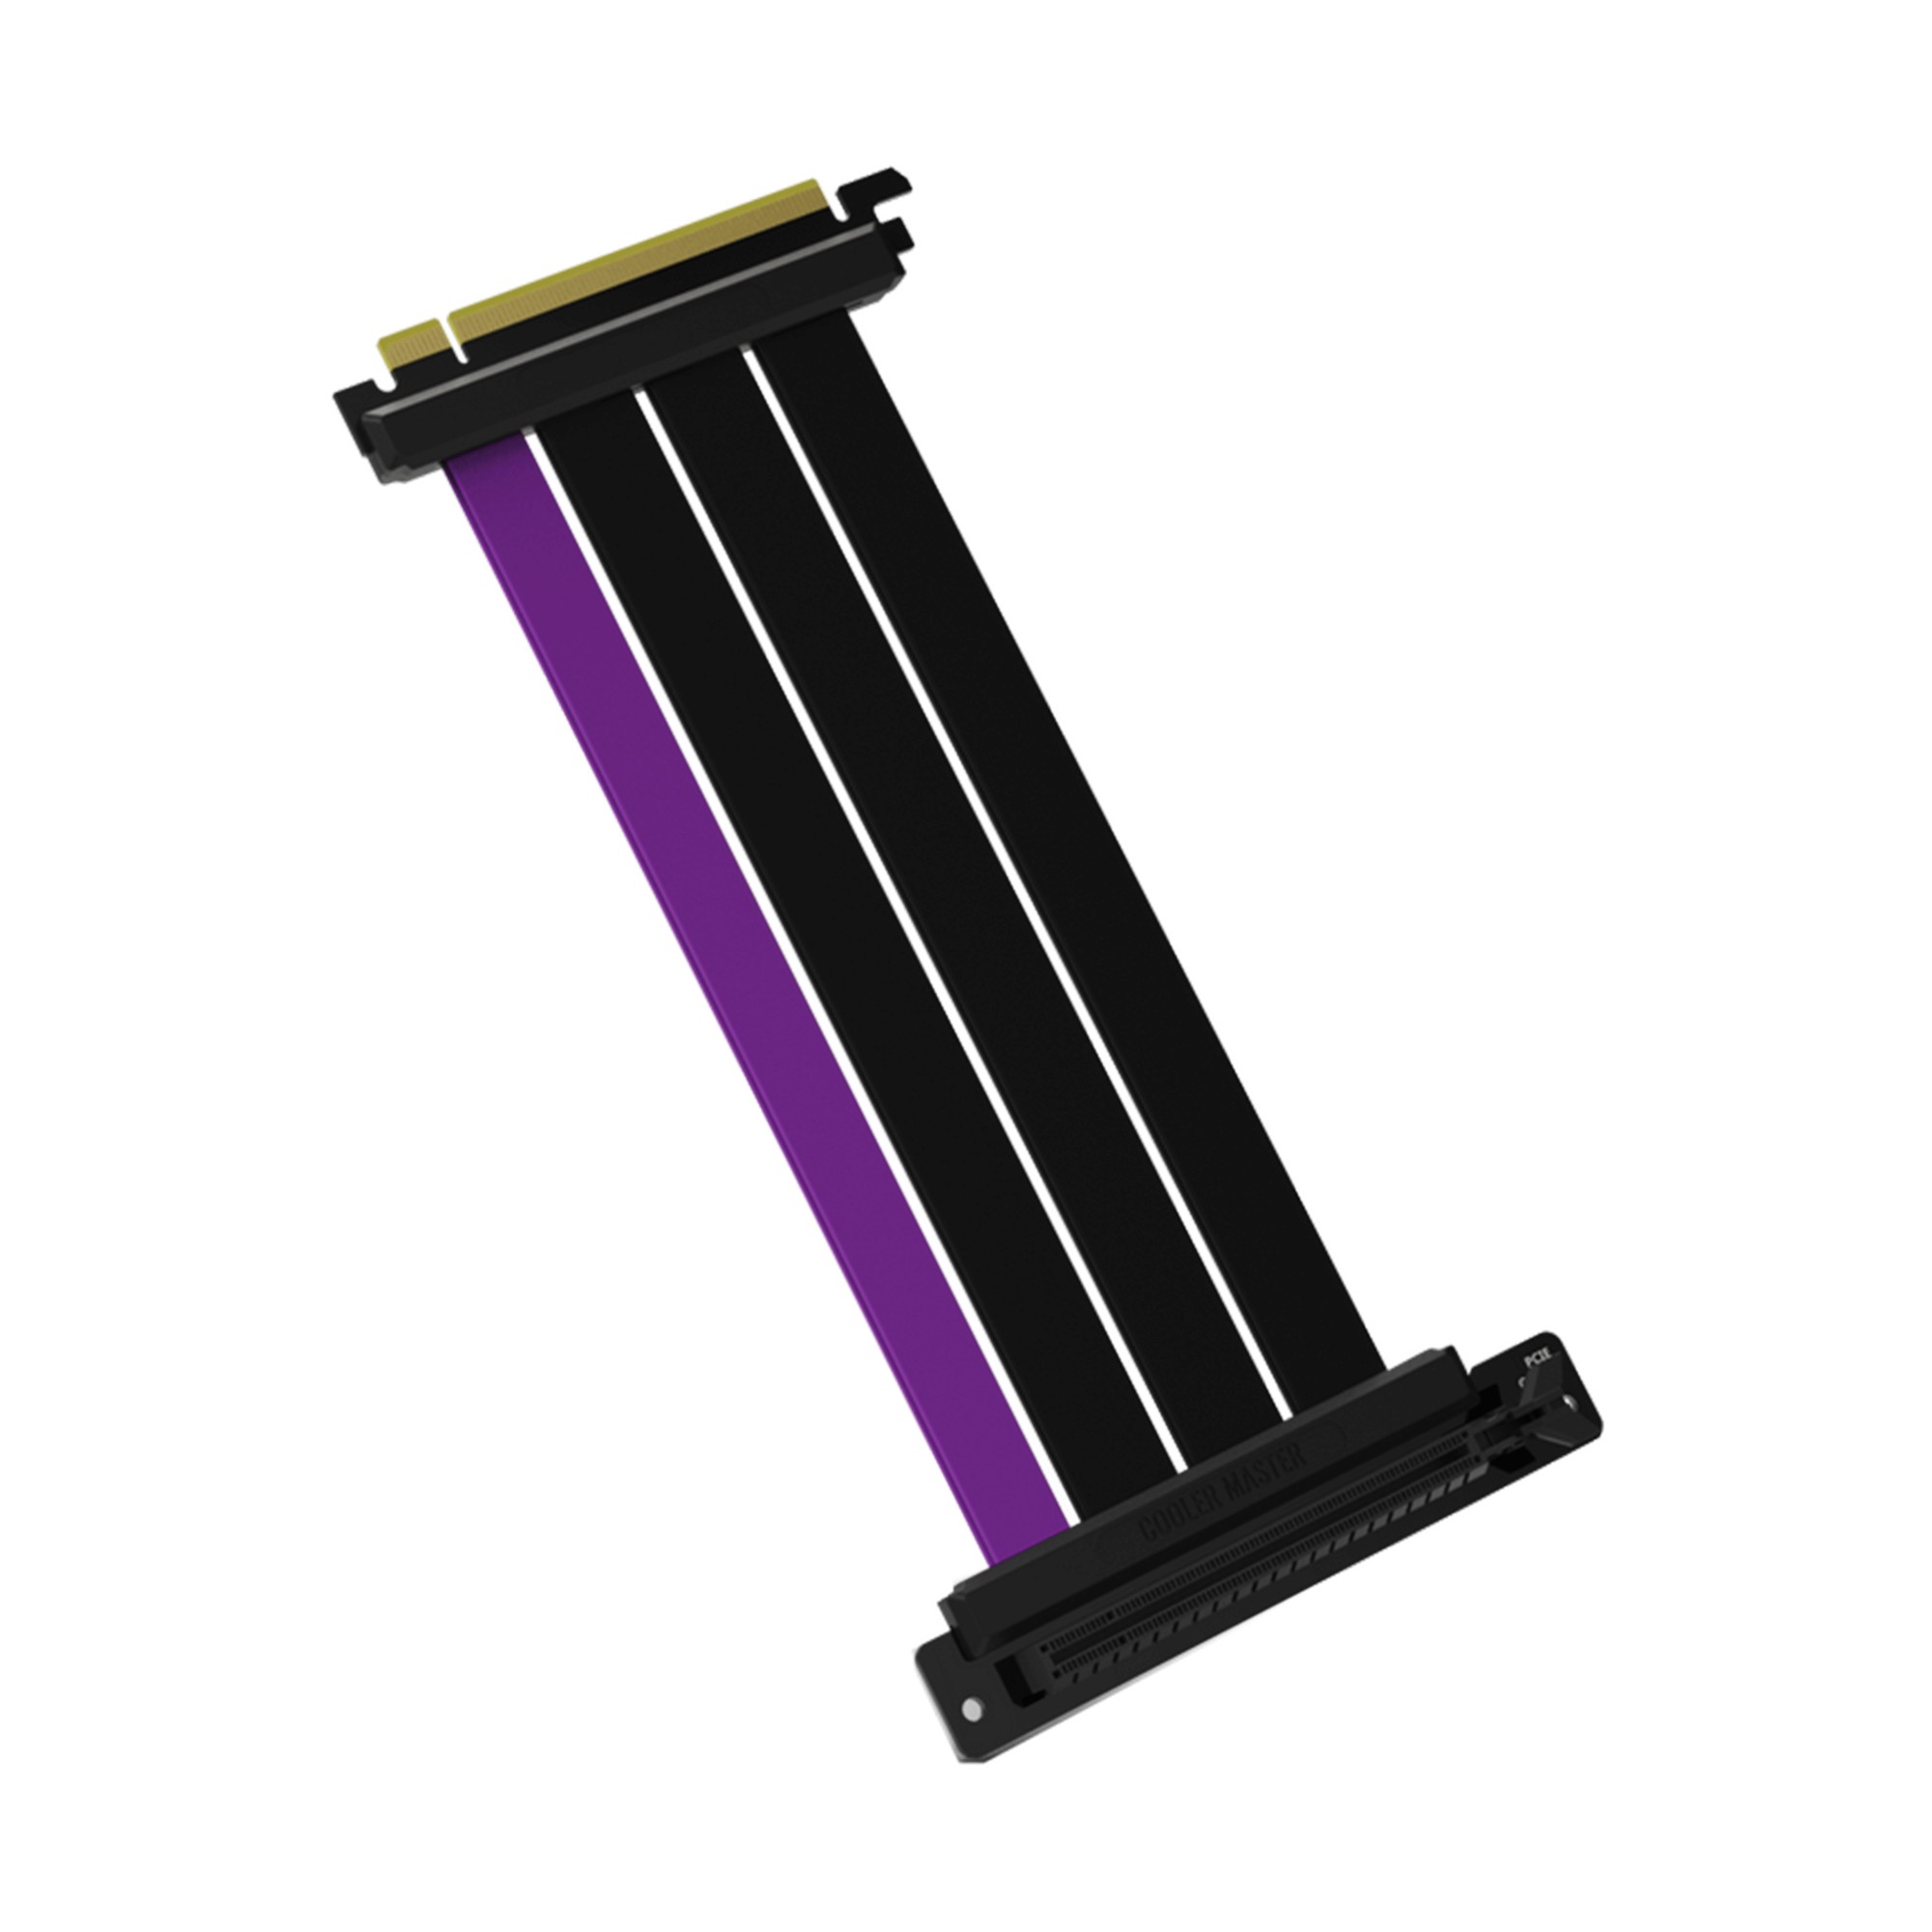 Cooler Master MasterAccessory Riser Cable PCIe 4.0 x16 interface cards/adapter Internal